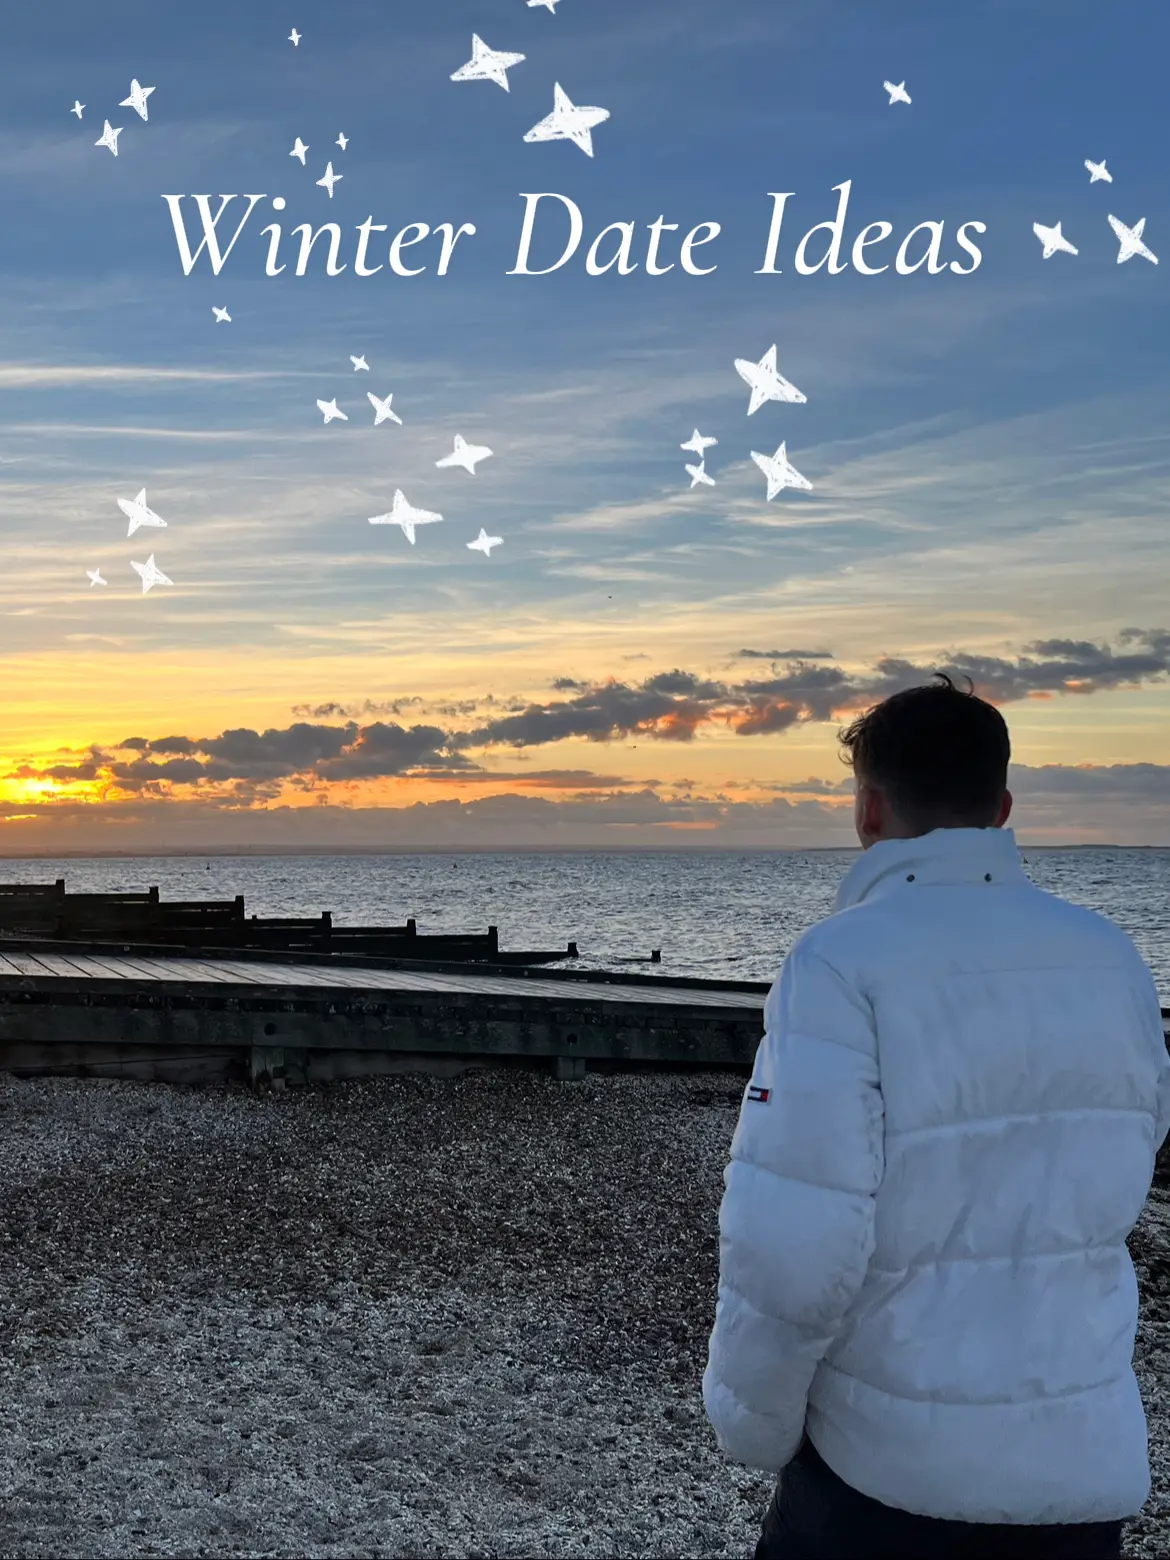 Winter Date ideas, Gallery posted by issymount